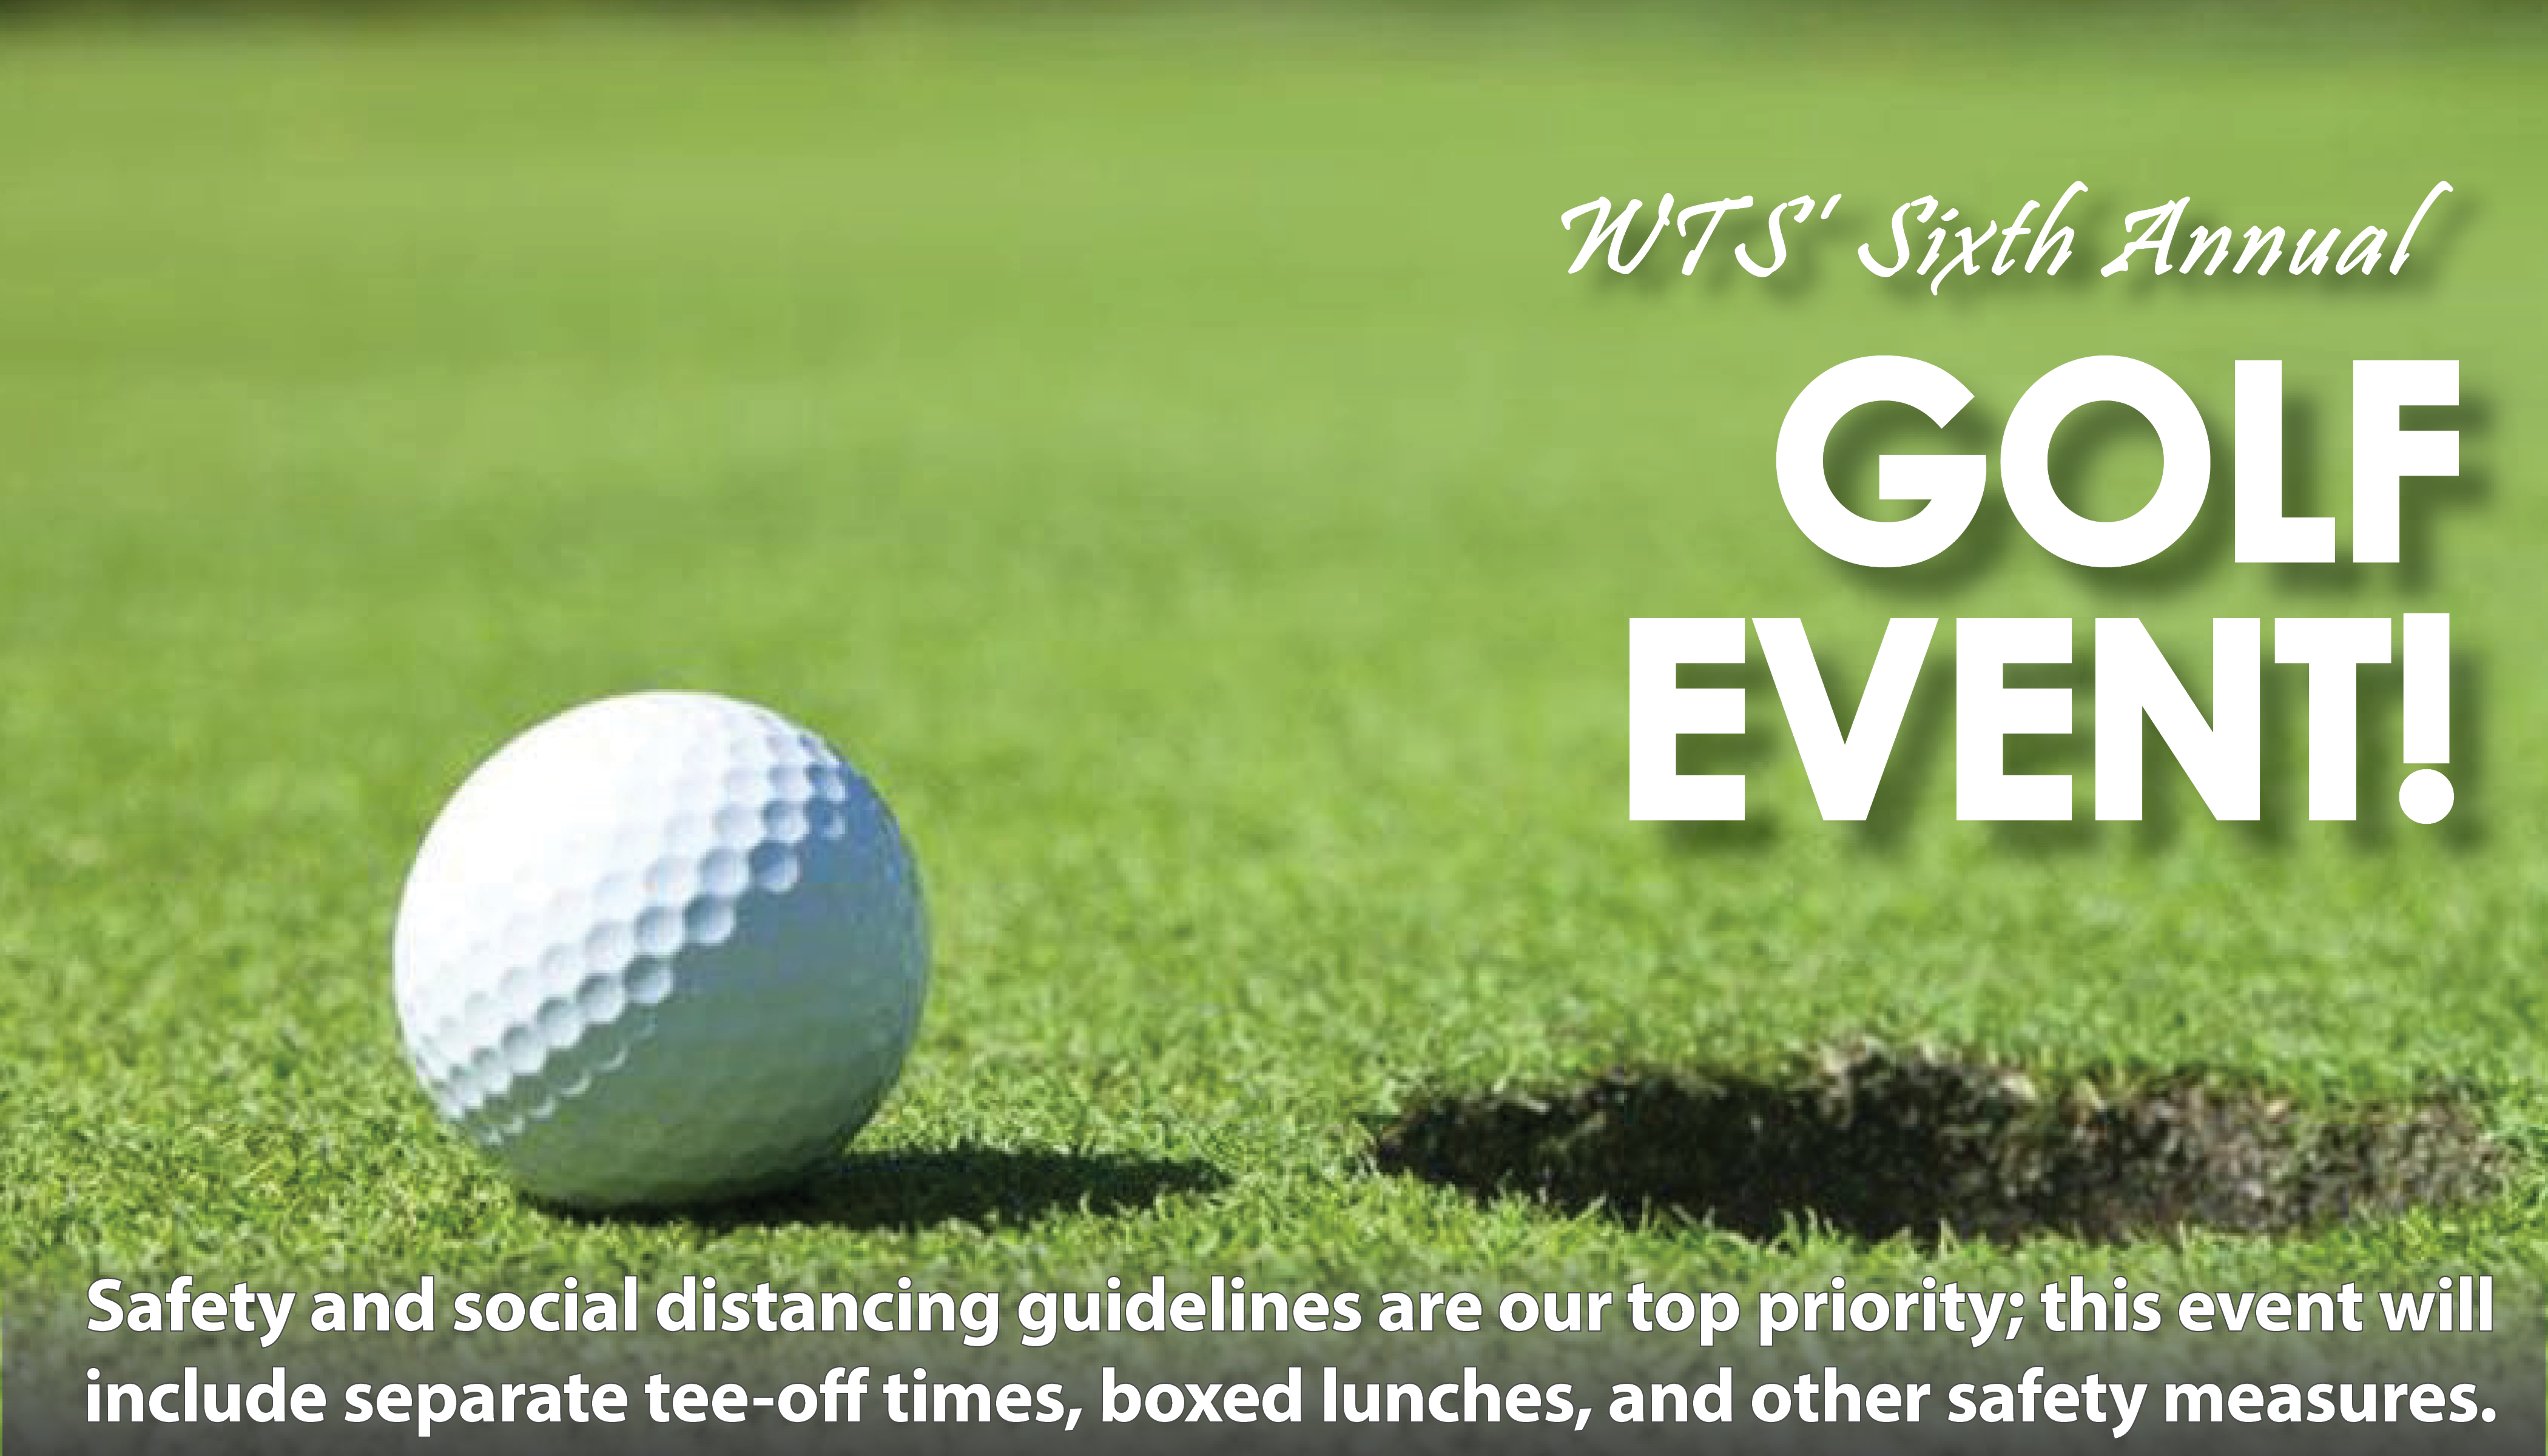 The Sixth Annual WTS Golf Event: A Safety Forward Event